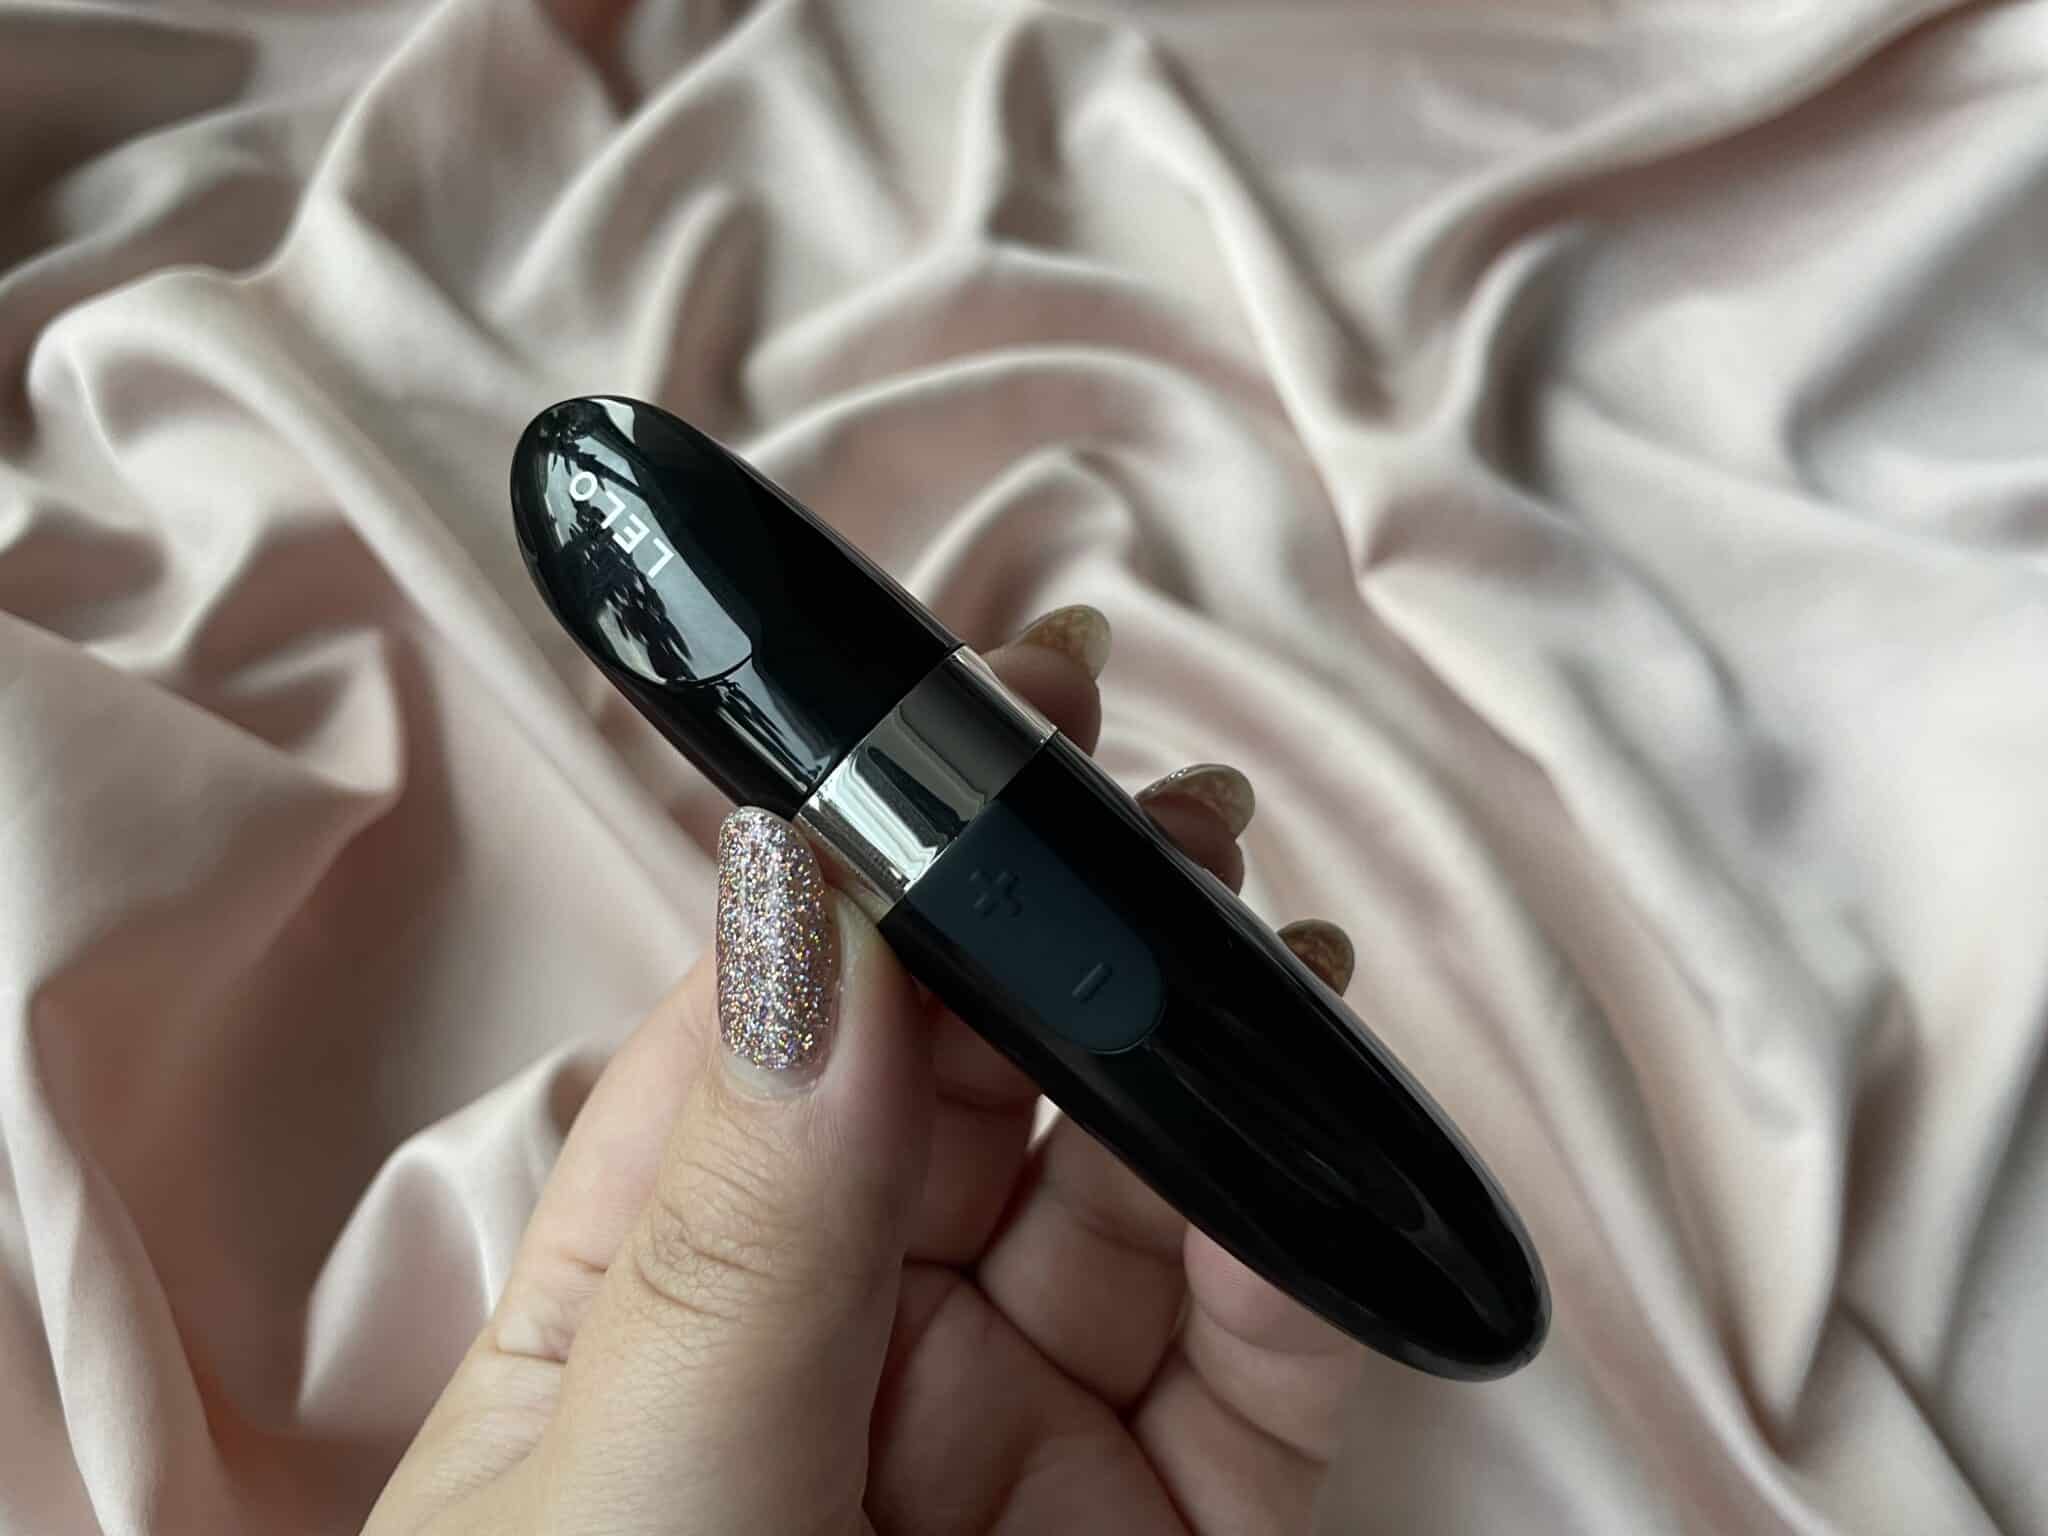 My Personal Experiences with LELO MIA 2